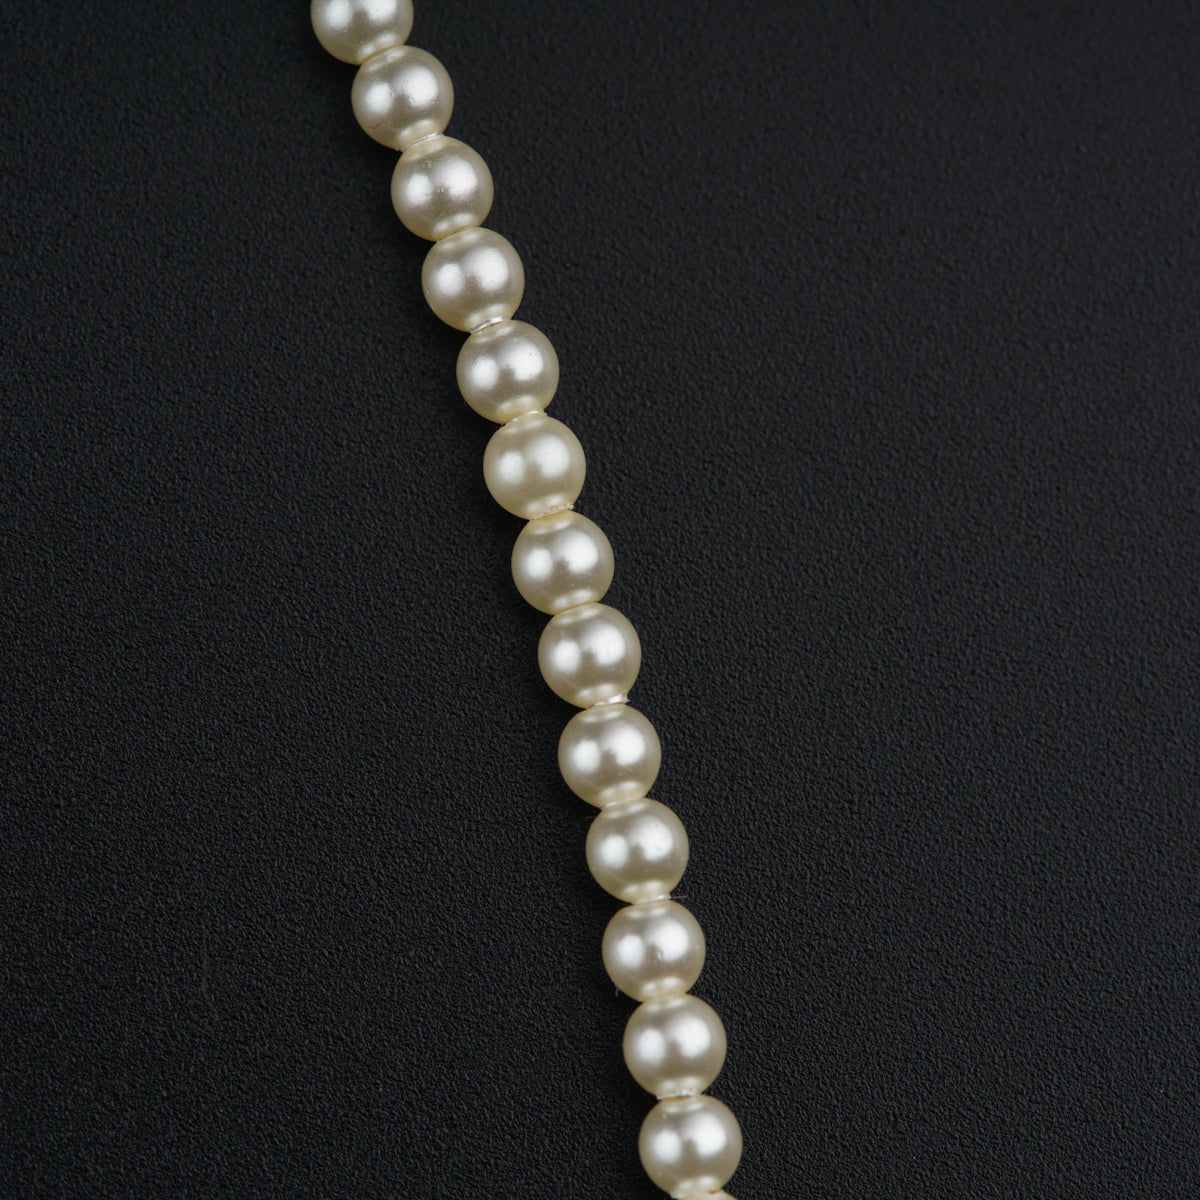 a necklace of pearls on a black background